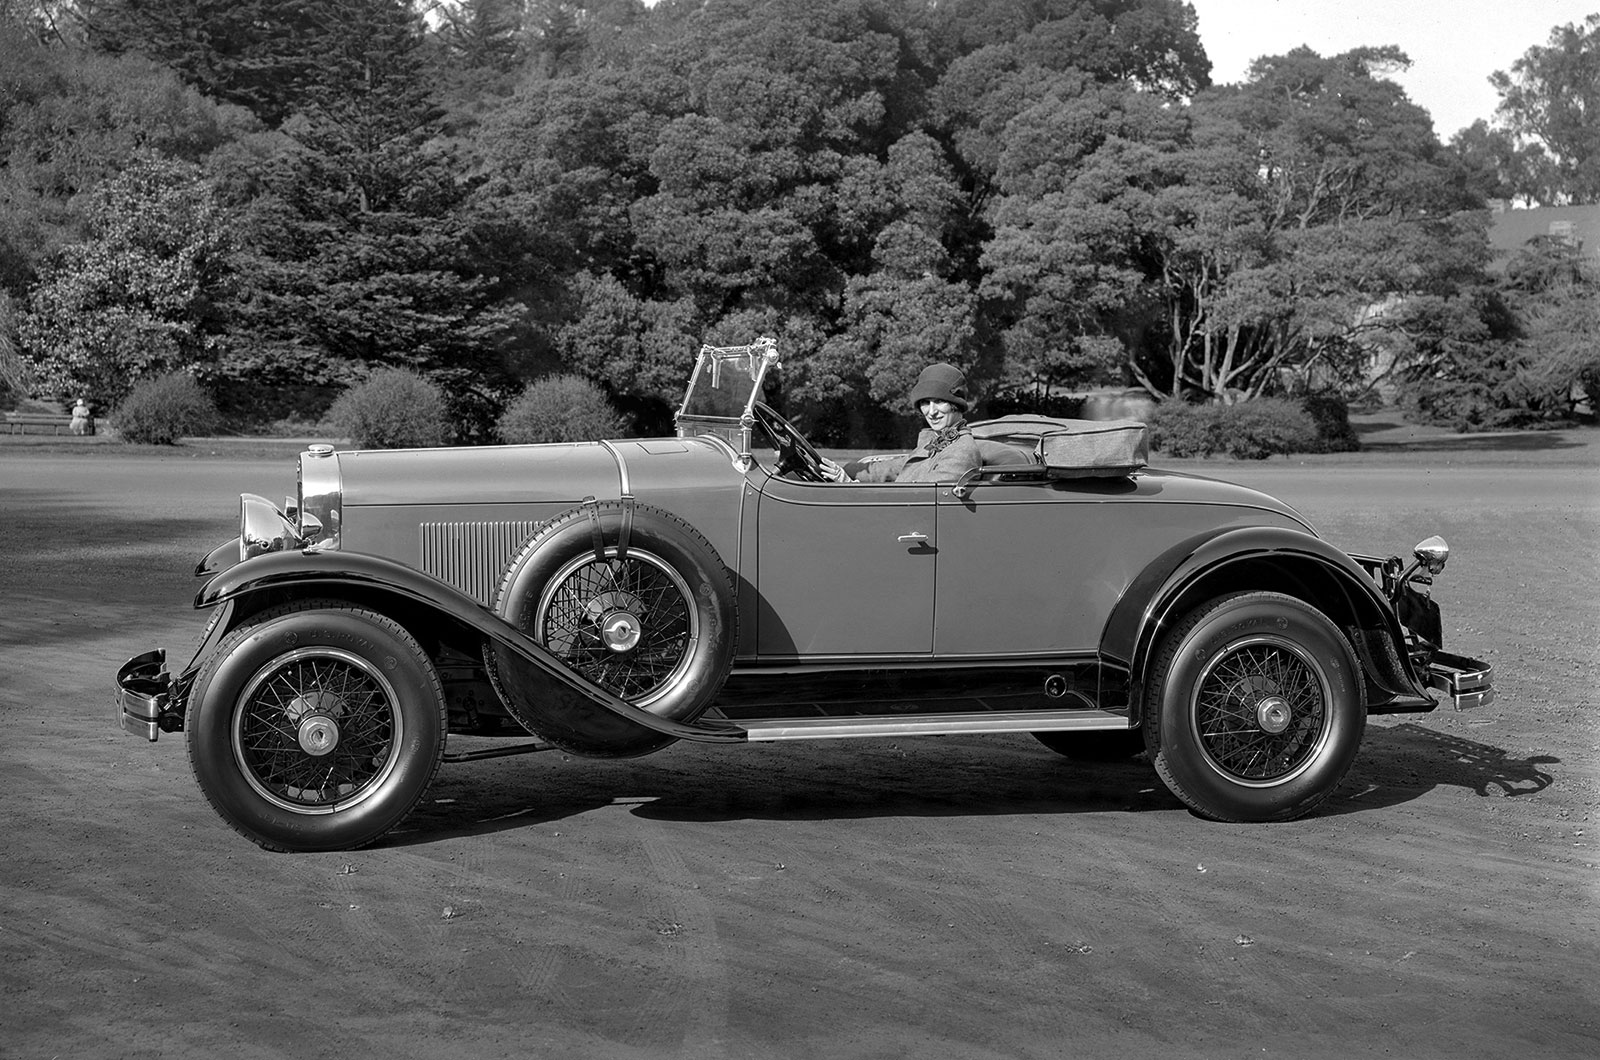 <p>Debate rages over which was the first car to feature a factory-fit radio. The 1929 <strong>Cadillac</strong> (and its <strong>La Salle </strong>offshoot) was available with a dealer-fitted Delco-Remy unit, but it seems British firm <strong>Crossley</strong> was the first car to feature a factory-fitted AM radio, in 1933.</p><p>Radios were a standard feature by the end of the ‘30s in America. The development of the transistor after the Second World War enabled radios to be much smaller and more reliable, and <strong>Chrysler </strong>became the first company to fit them, doing so in late 1955 for 1956 model year cars. Higher sound quality FM receivers were progressively rolled out from the 1950s onward.</p><p><strong>GROUNDBREAKER SCORE: 9 </strong>– a change for the better.</p>